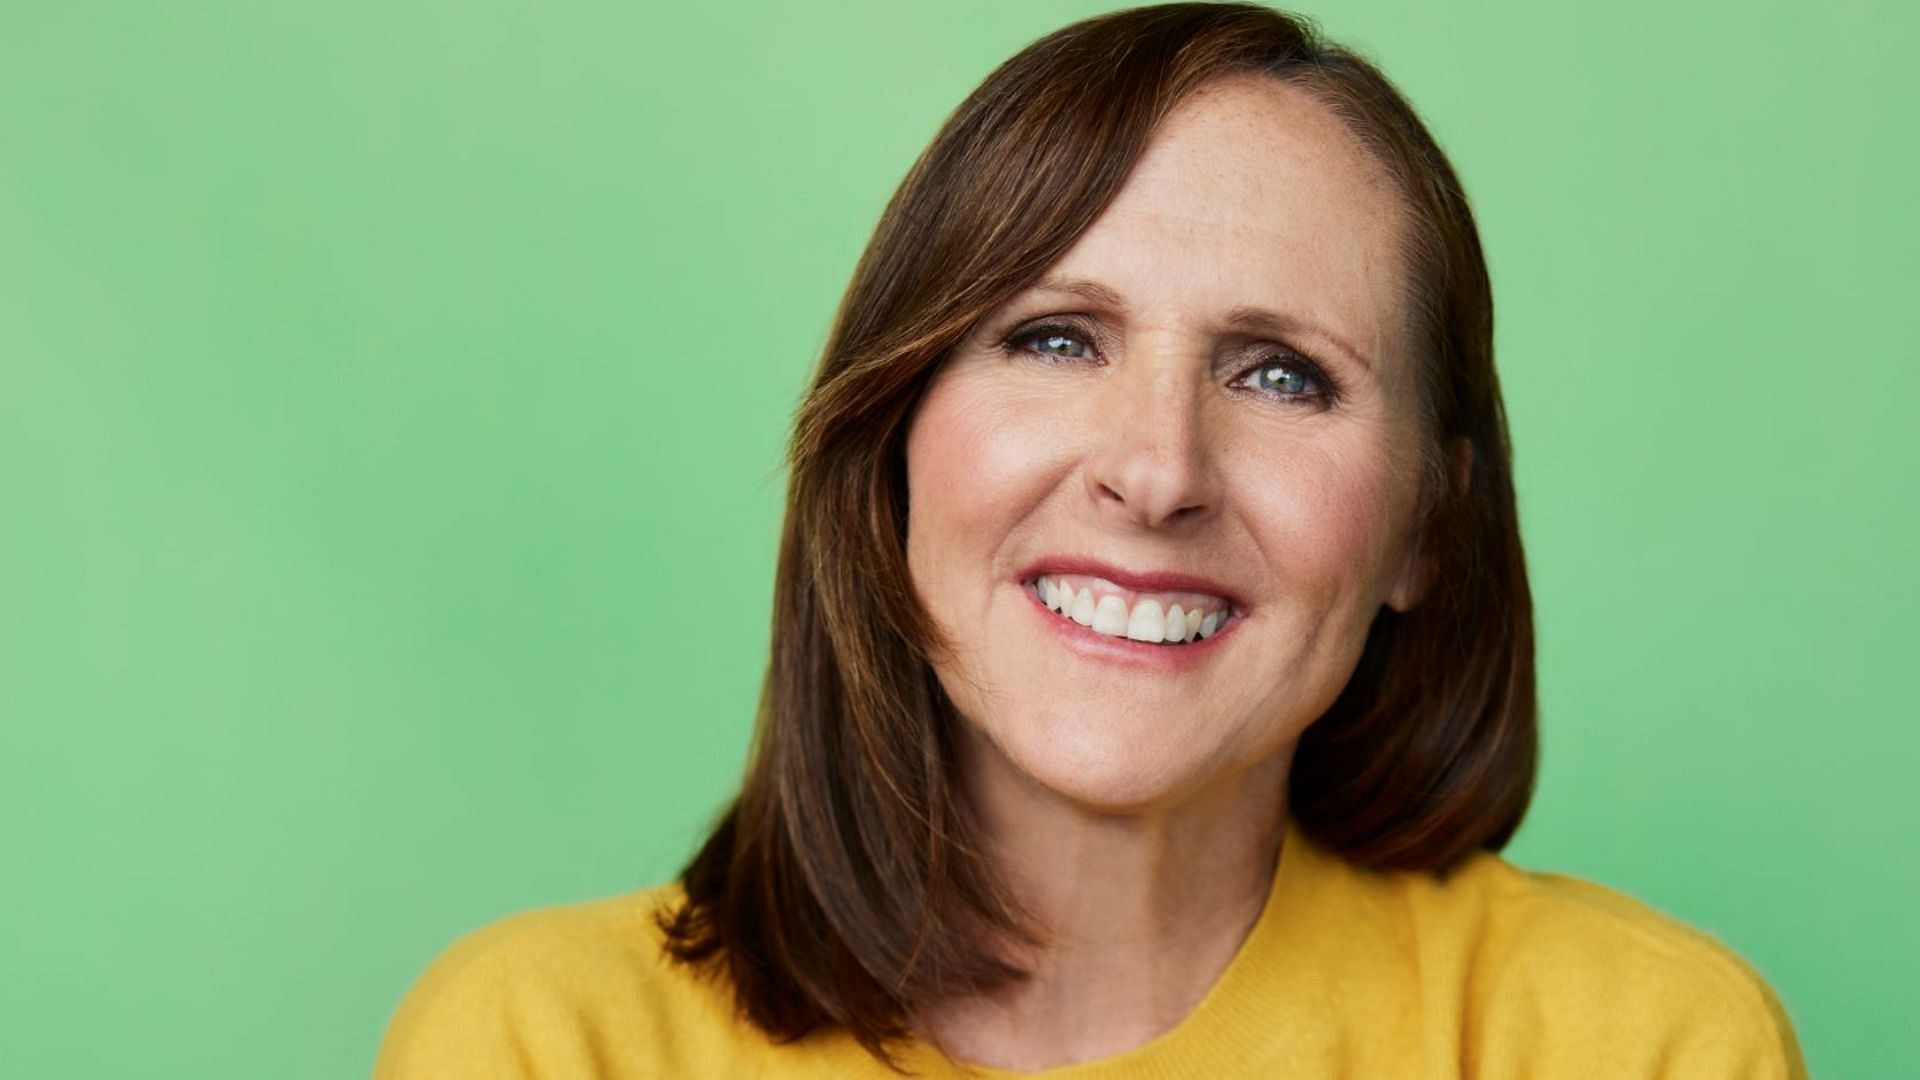 Molly Shannon went through a tragic family accident when she was 4-years-old. (Image via American Library Association)